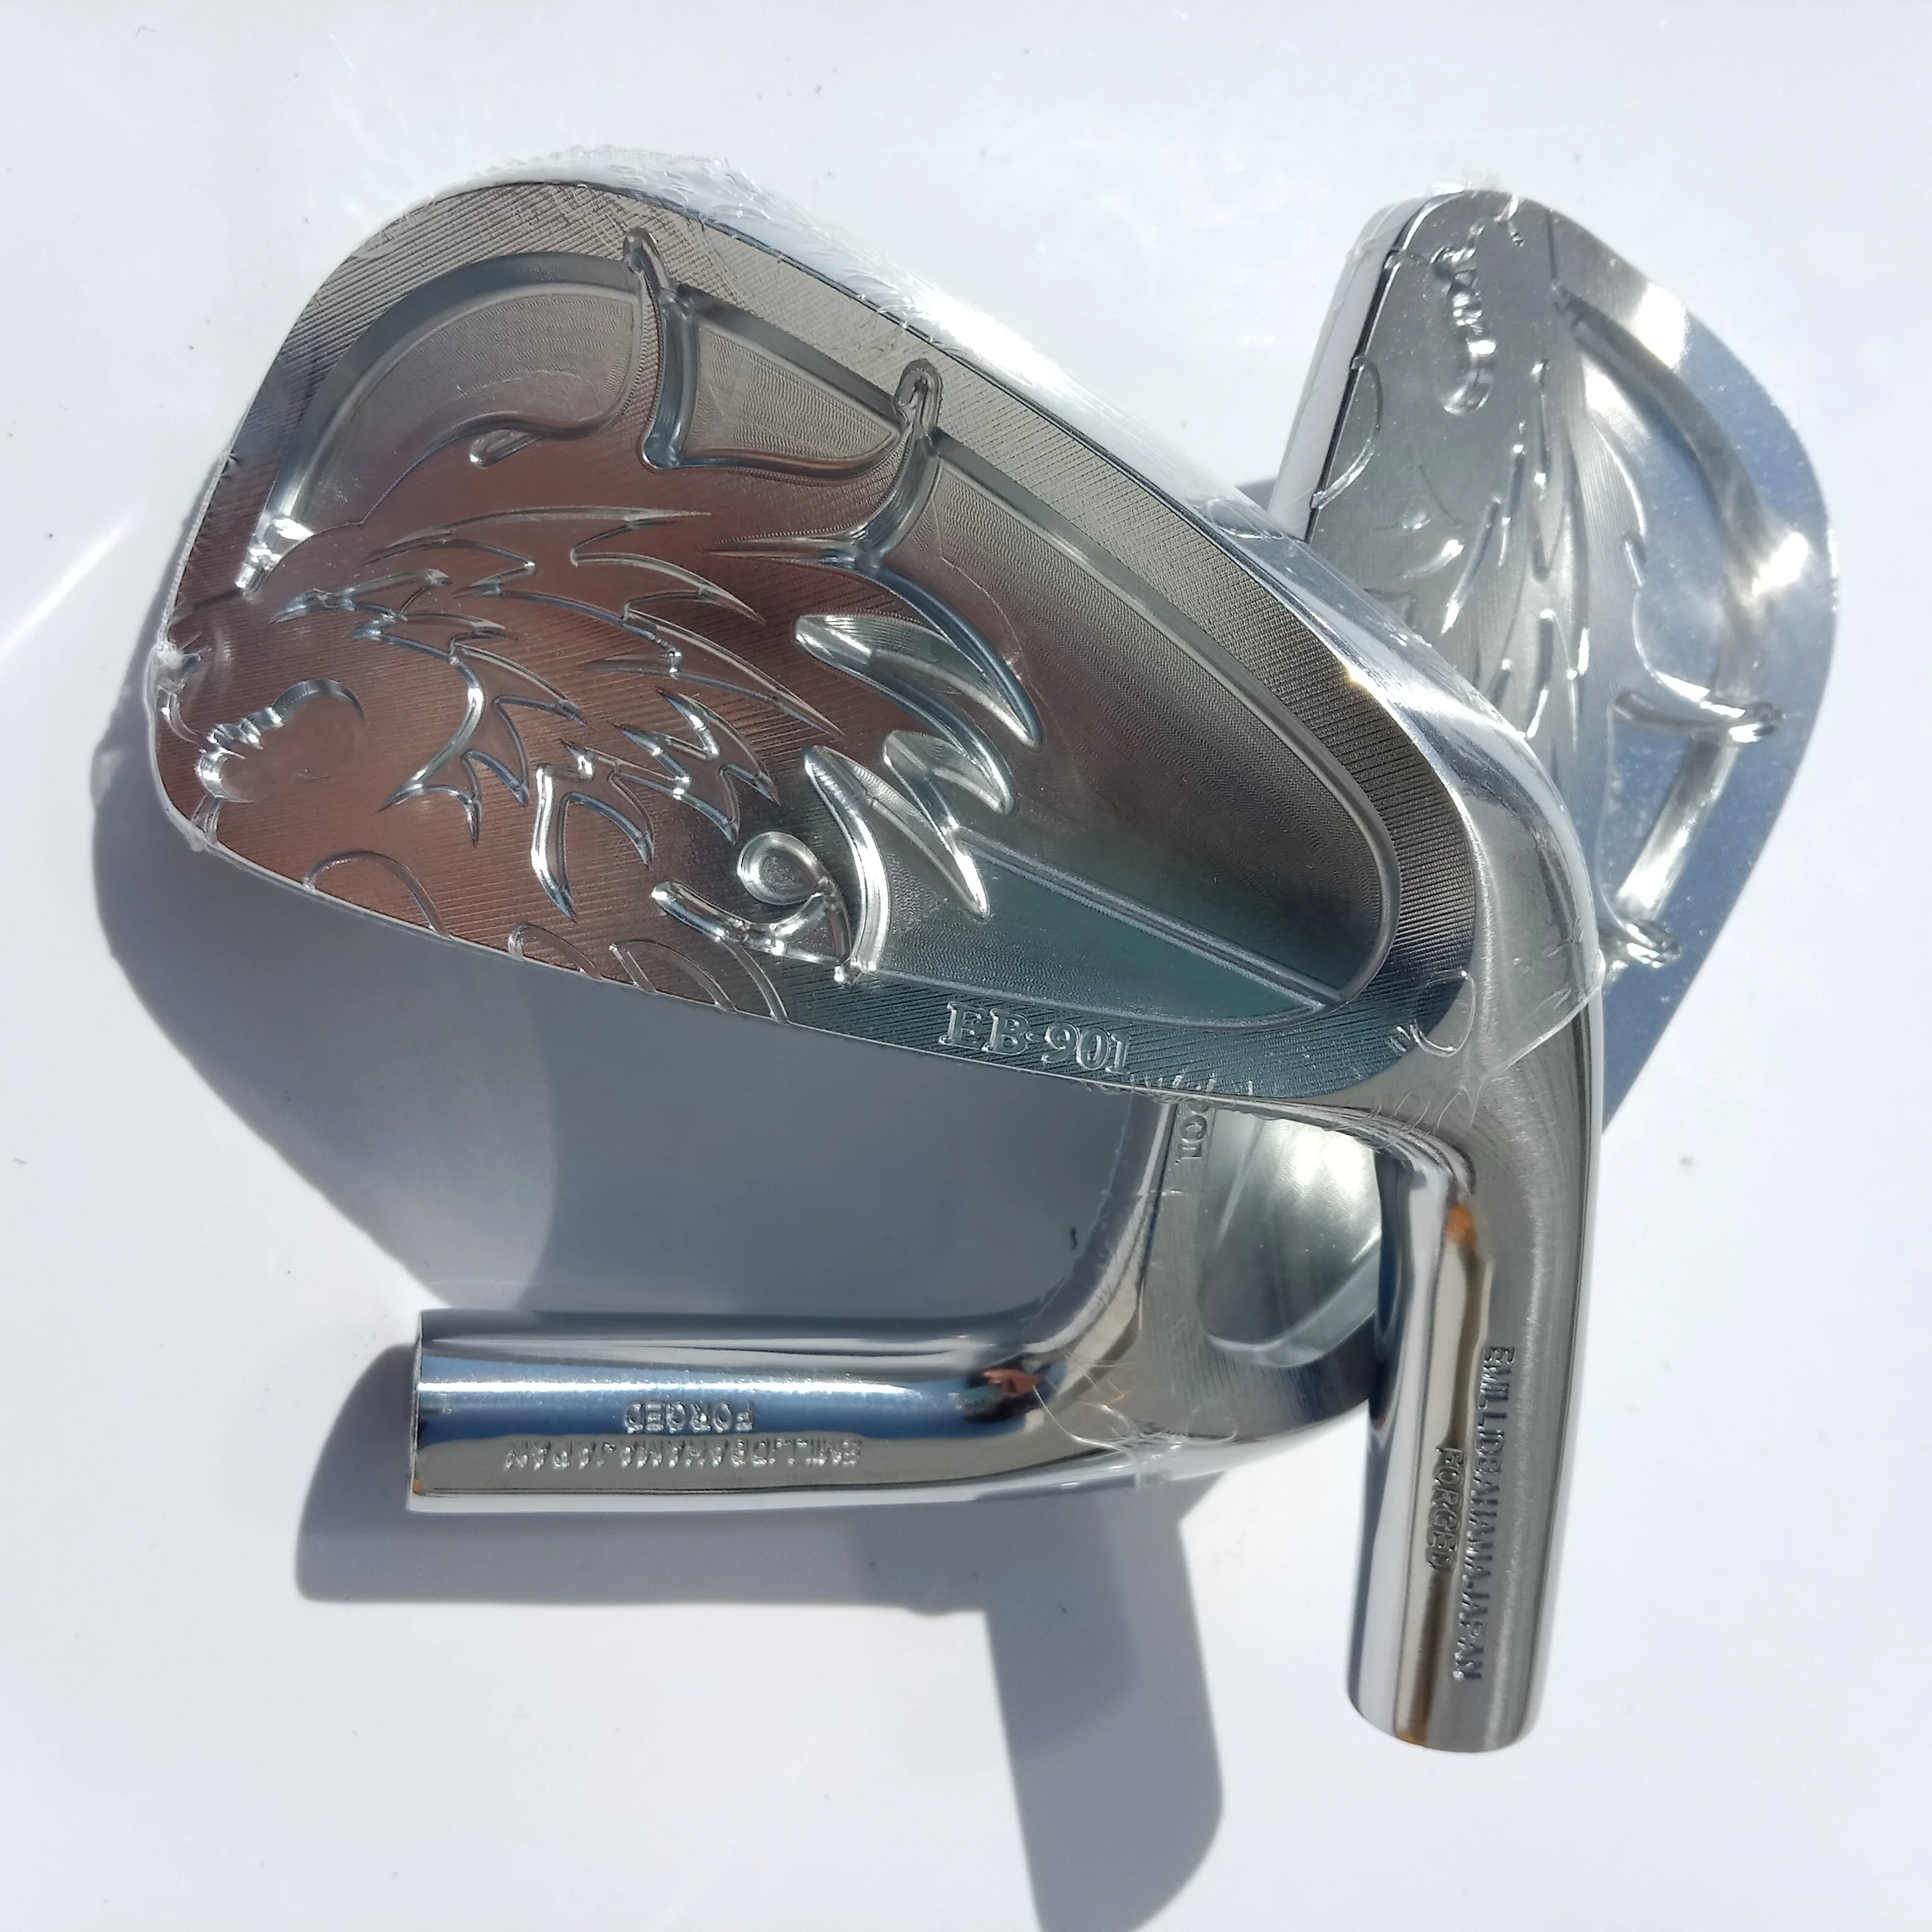 

New golf irons Golf Clubs EMILLID BAHAMA EB-901 Golf Irons set silver forged limited golf iron head